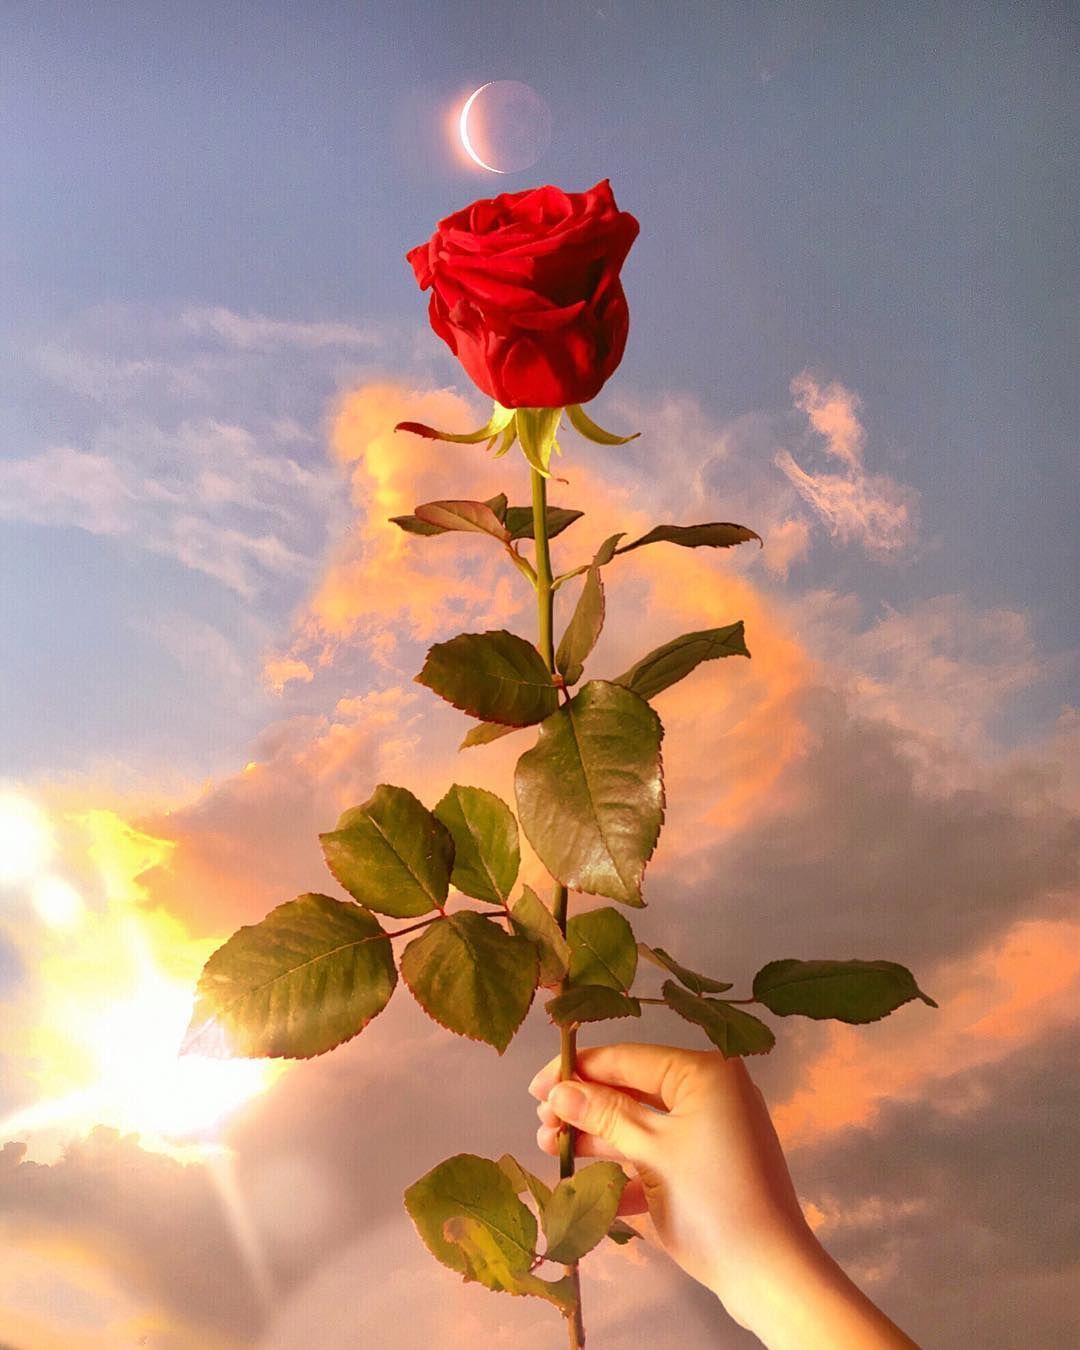 A hand holding a red rose with the sun and moon in the background - Roses